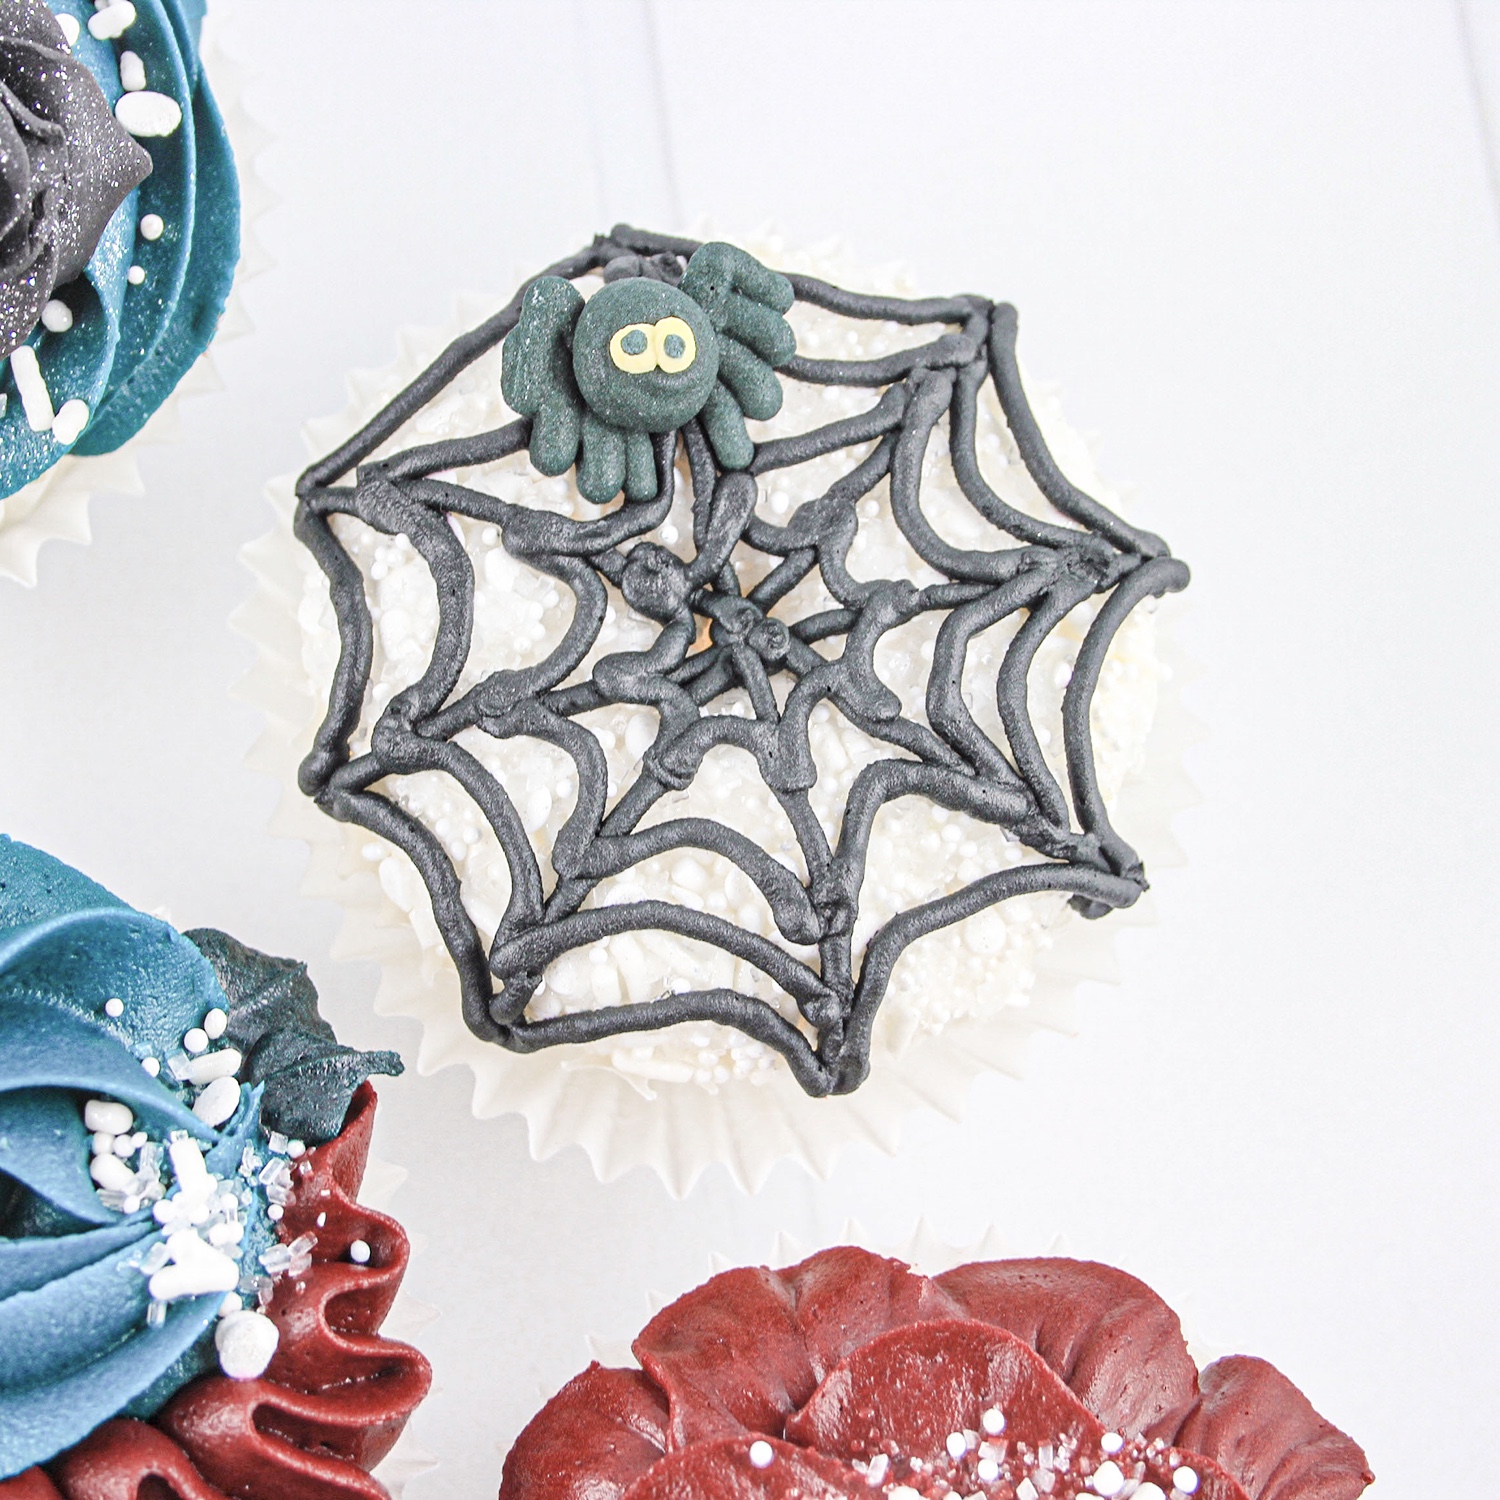 Spiders Web piped cupcake with a bed of white spinkles looking like spider eggs. 